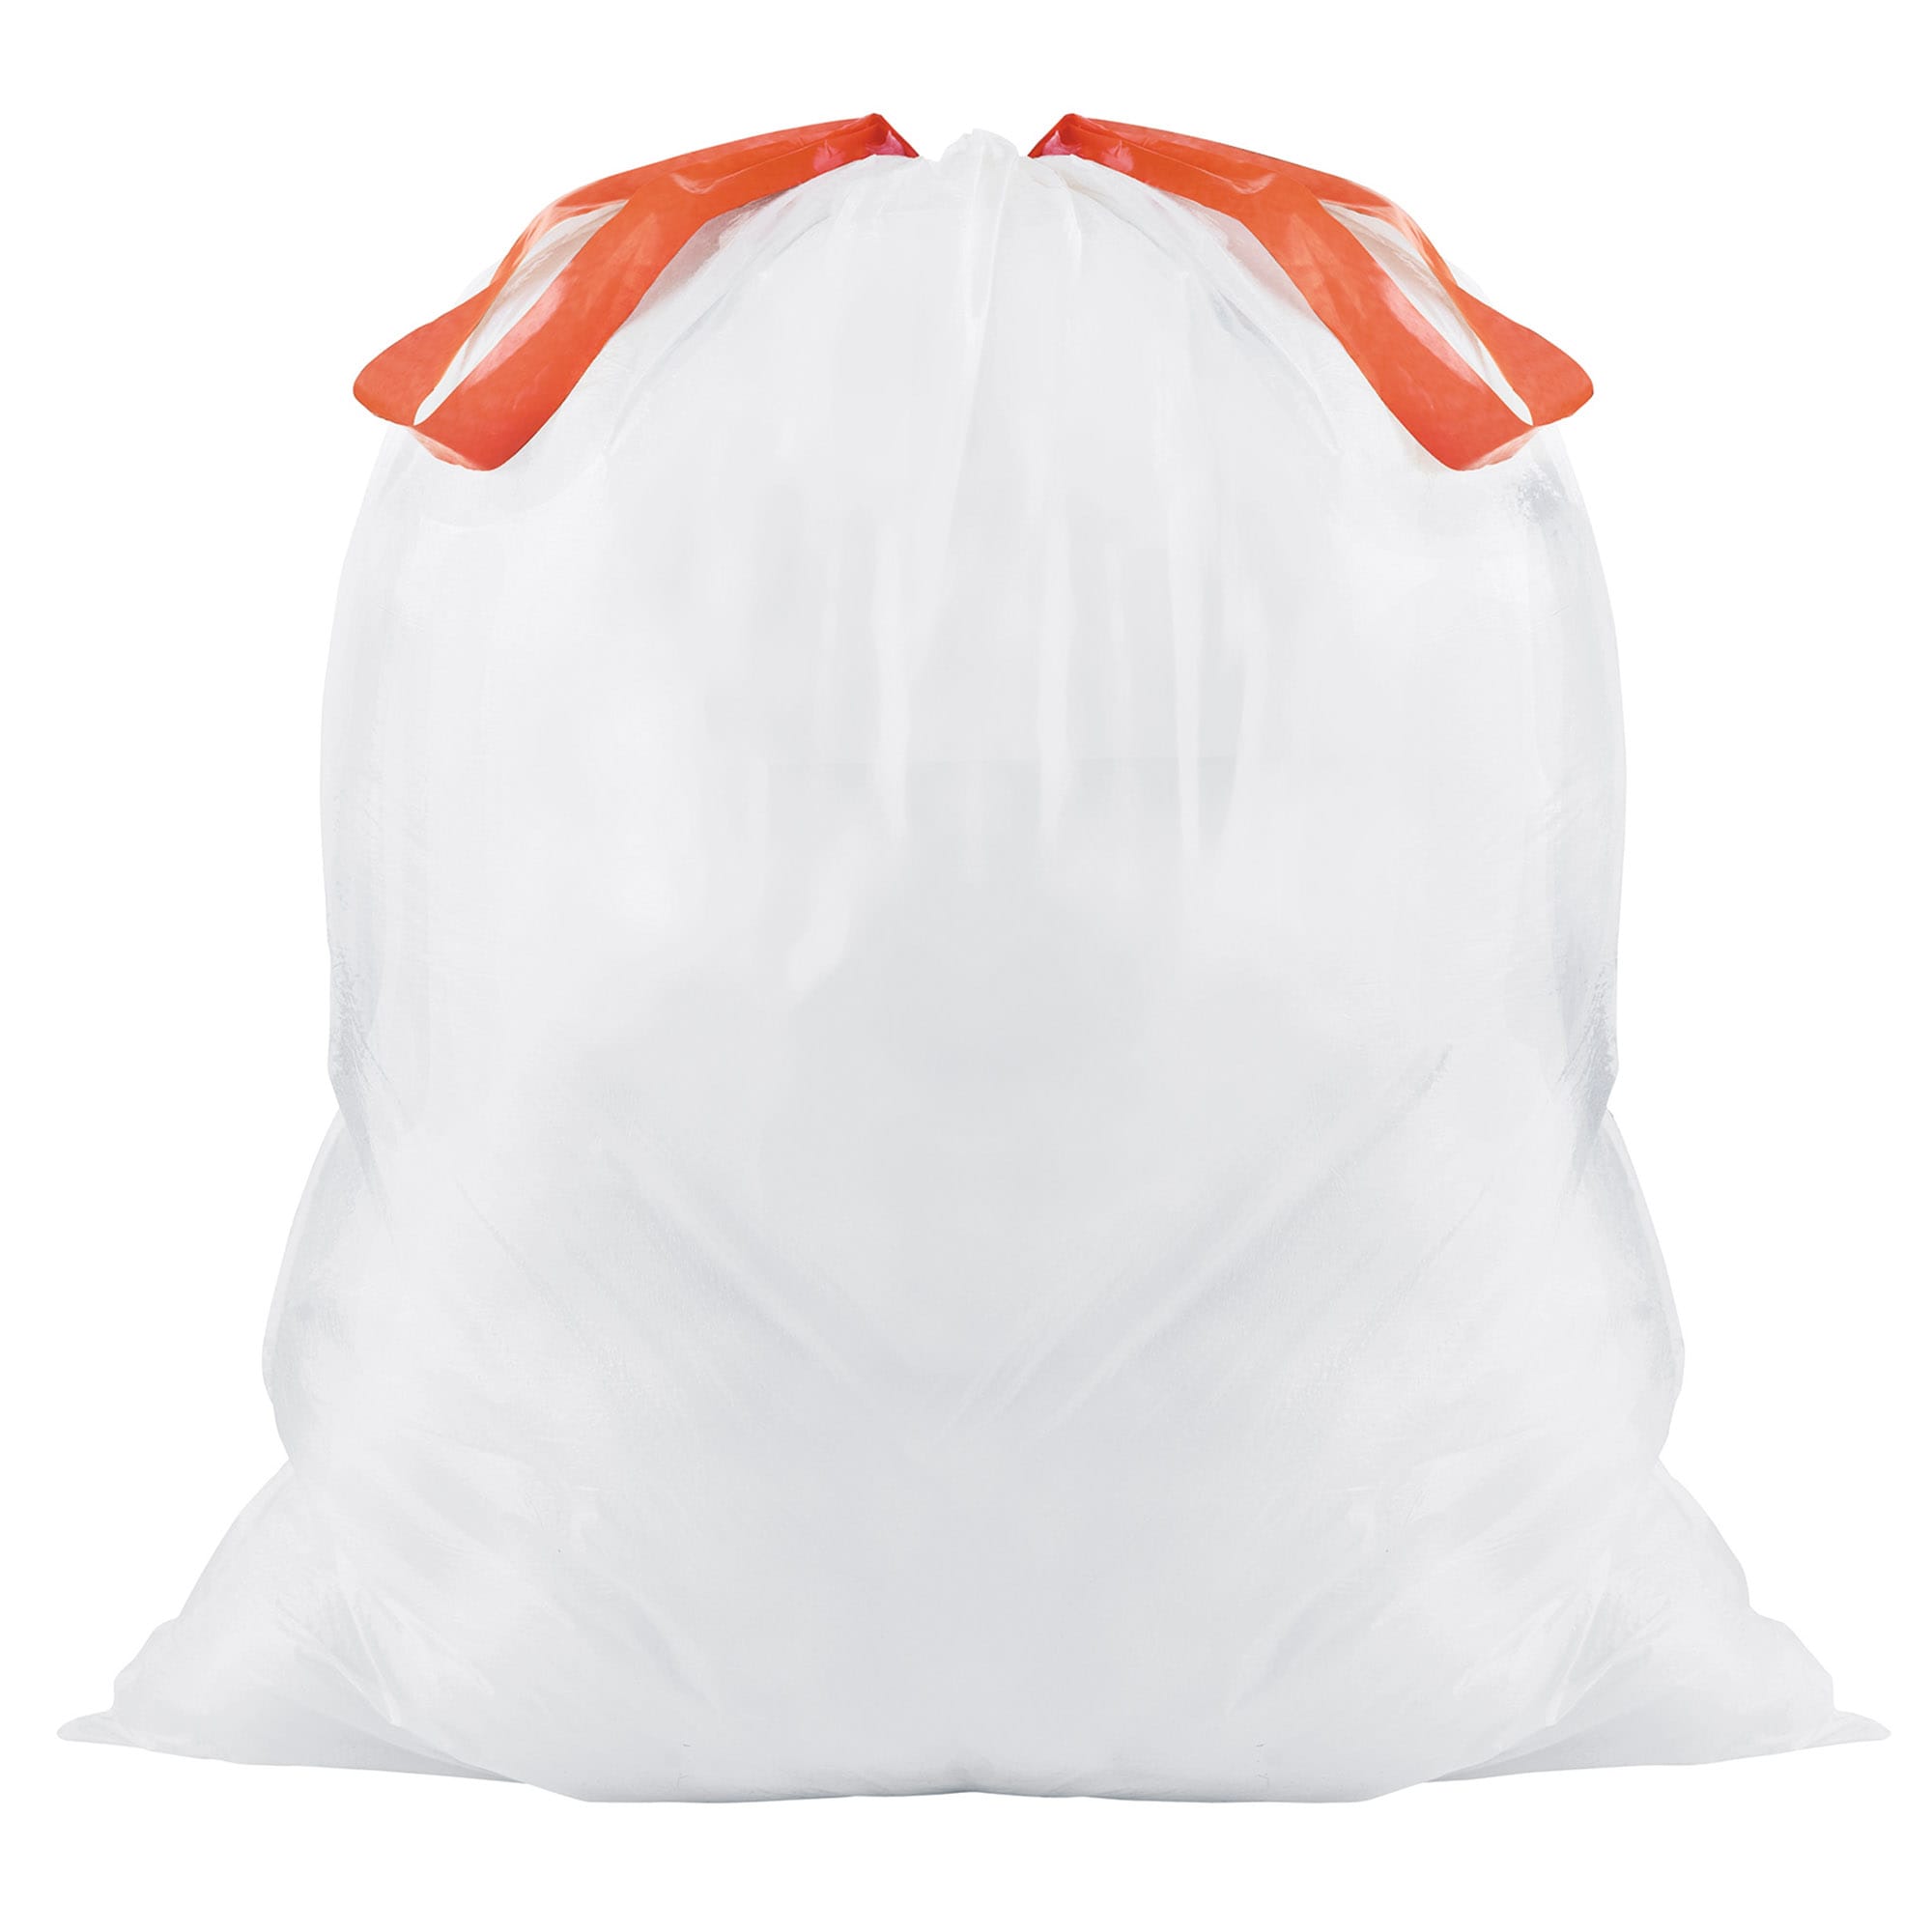 Husky Hk18xds050w Trash Compactor Bag with Drawstring, 18 Gal Capacity, White - 50/Bags